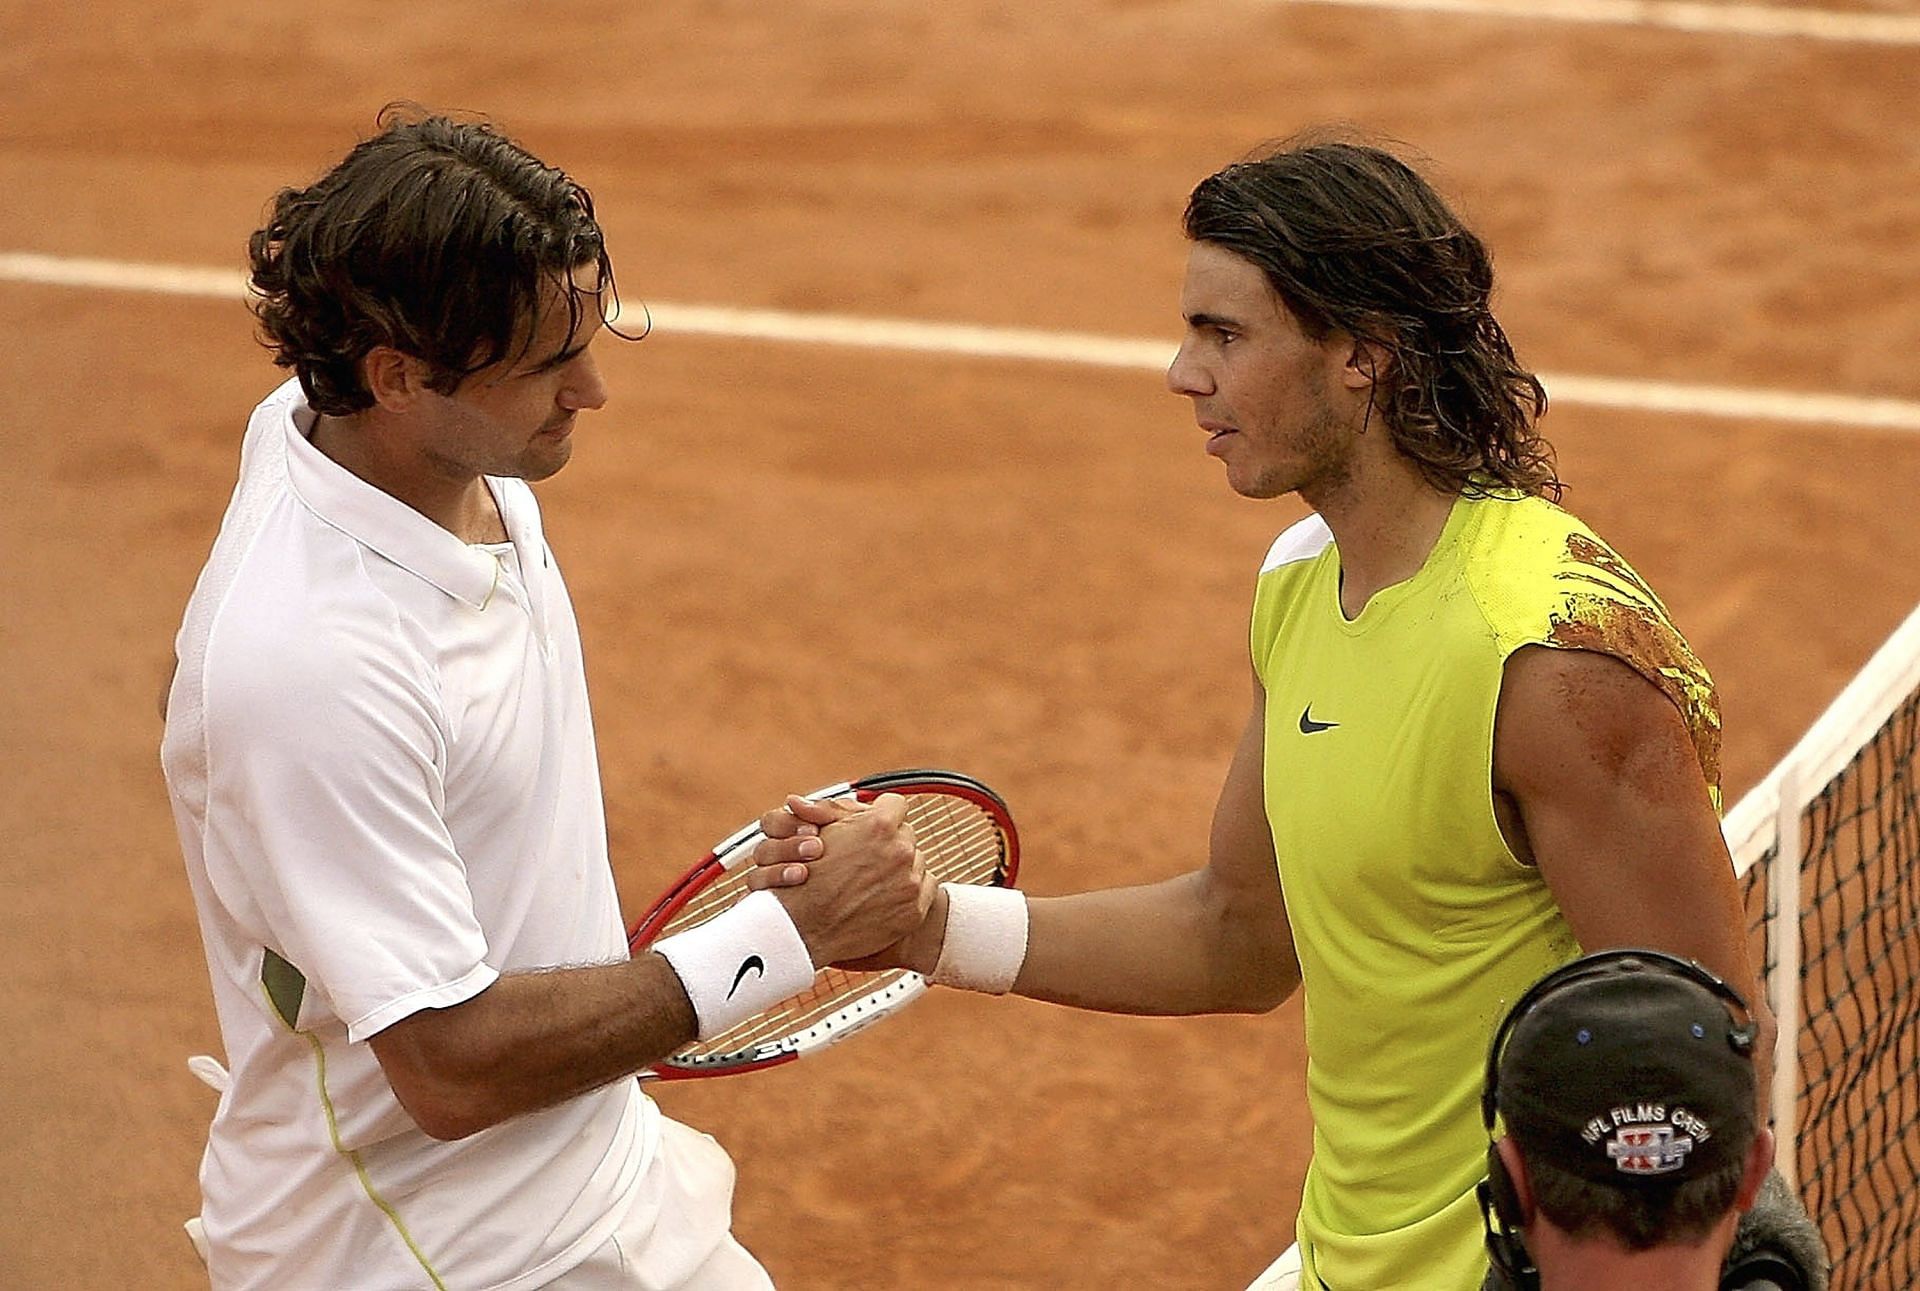 Rafael Nadal beat Roger Federer in a thrilling final in Rome